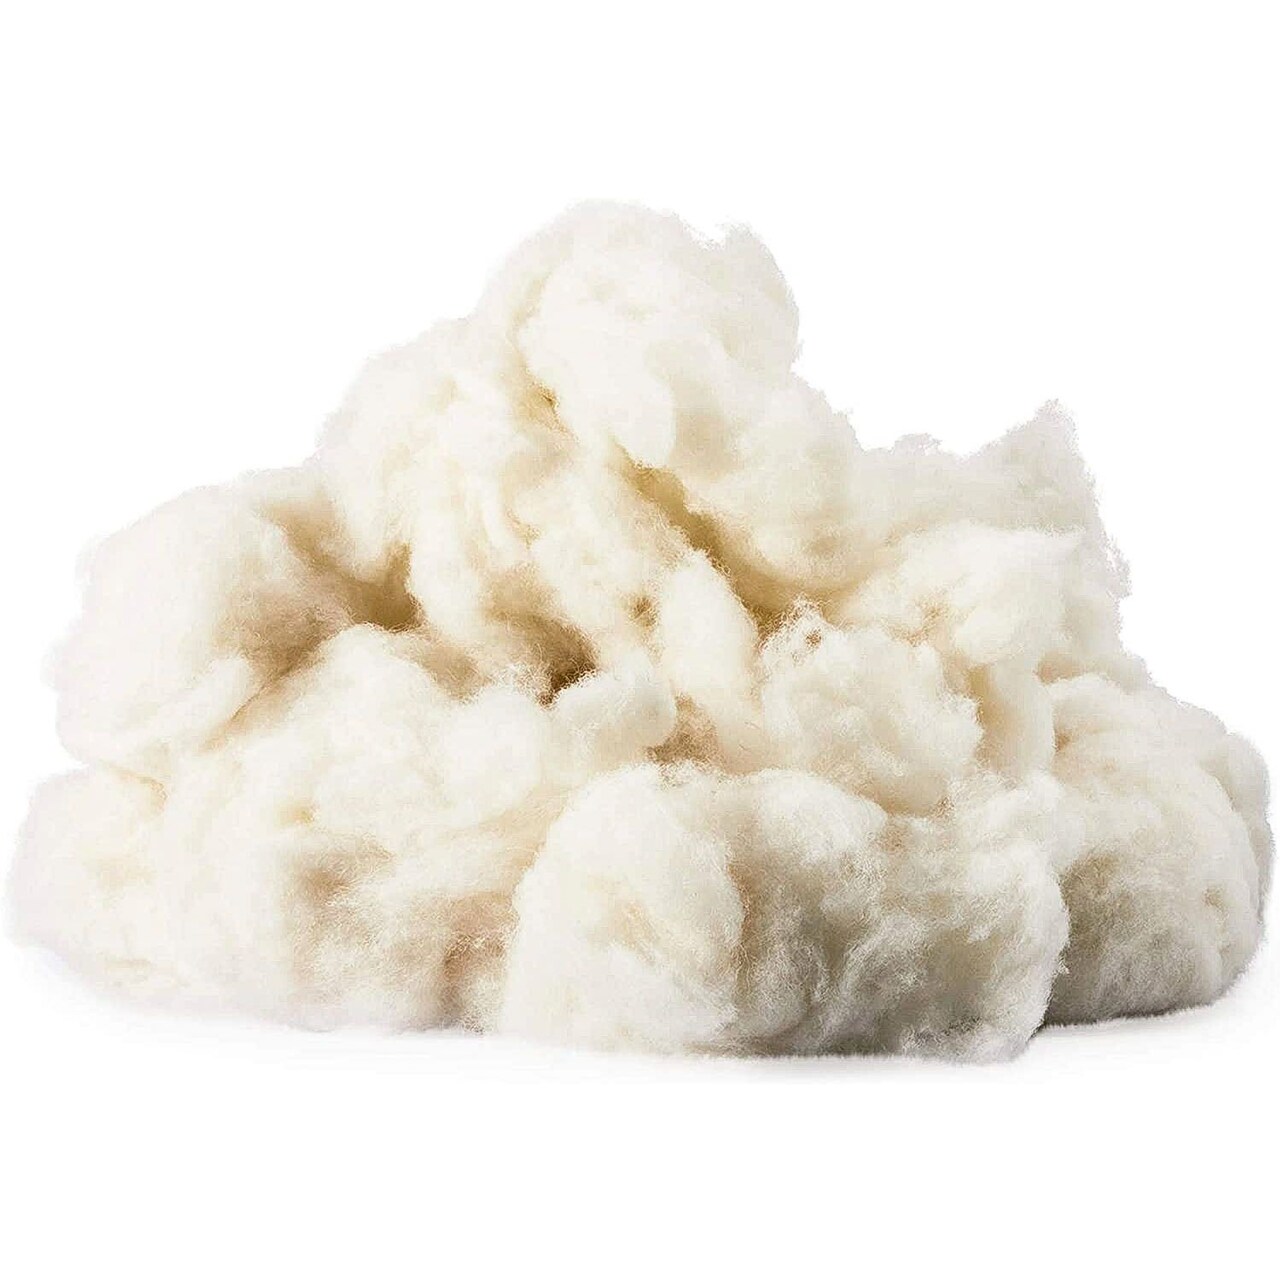 Stuffing for Crafts, Wool Batting for Pillow Filler, Stuffed Animals,  Cushions (16oz, Natural White)